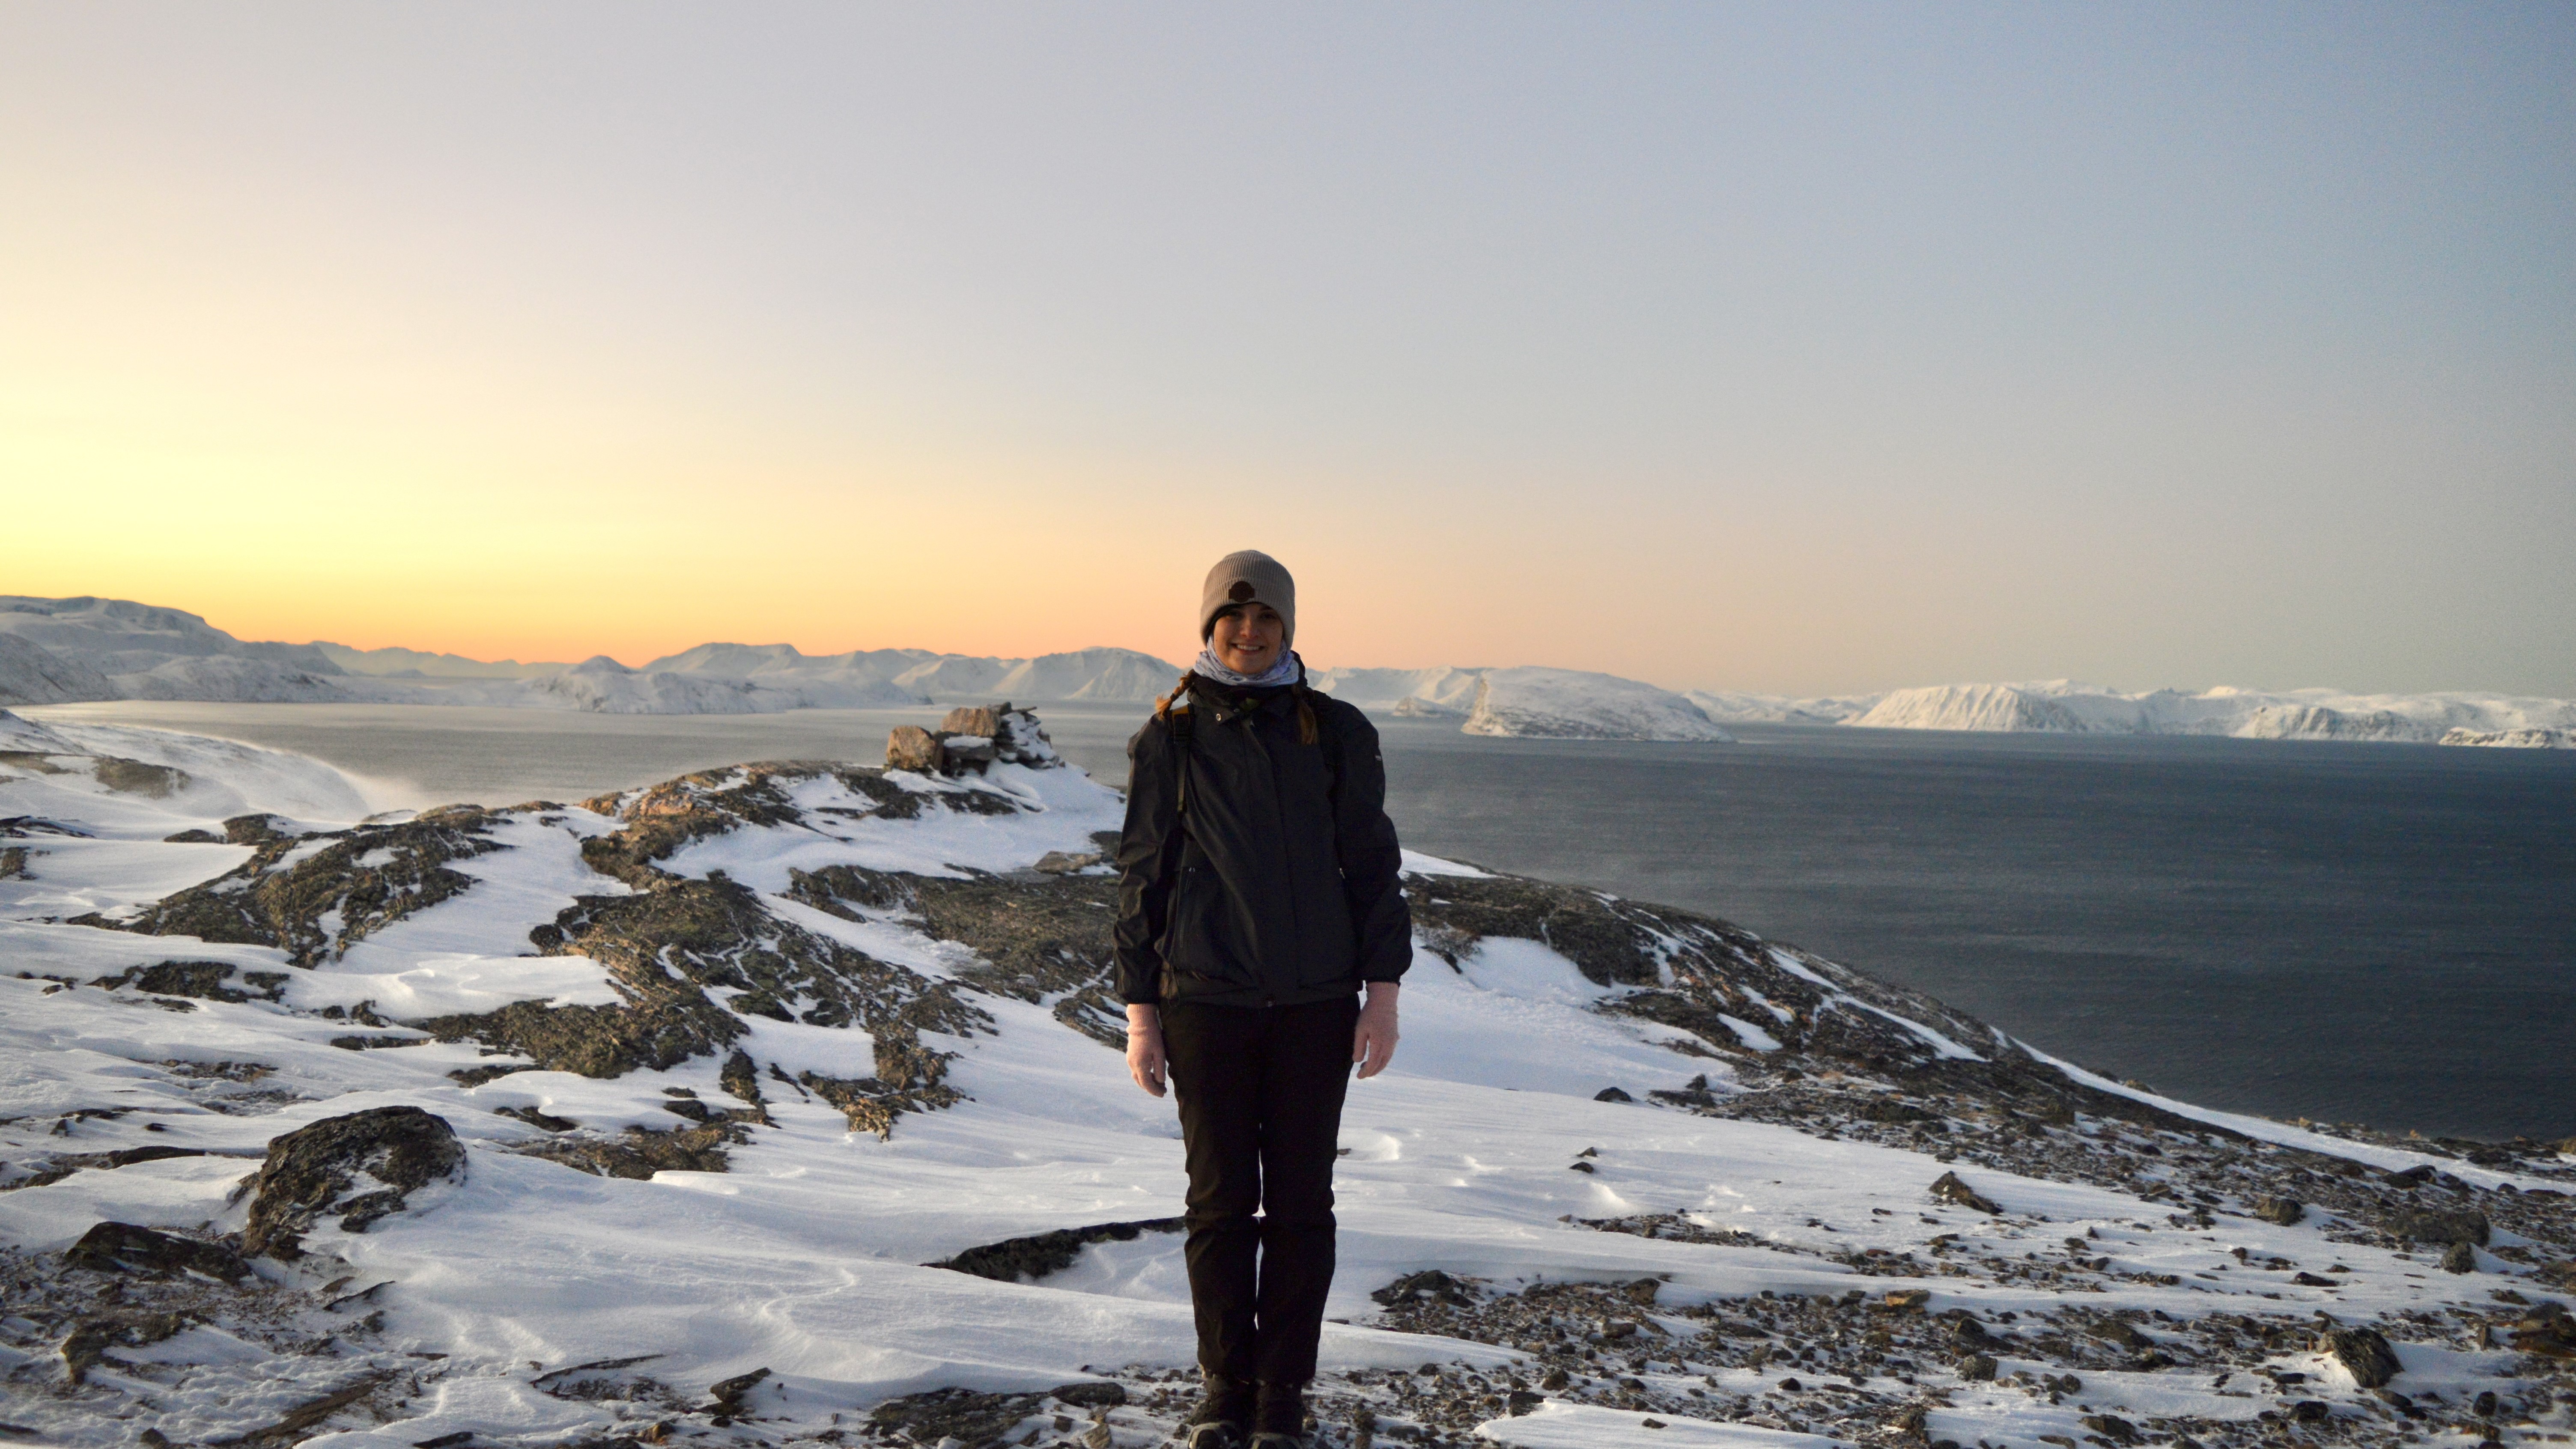 A woman is standing in the center of the image with a snowy mountain underfoot and the sea in the distance.